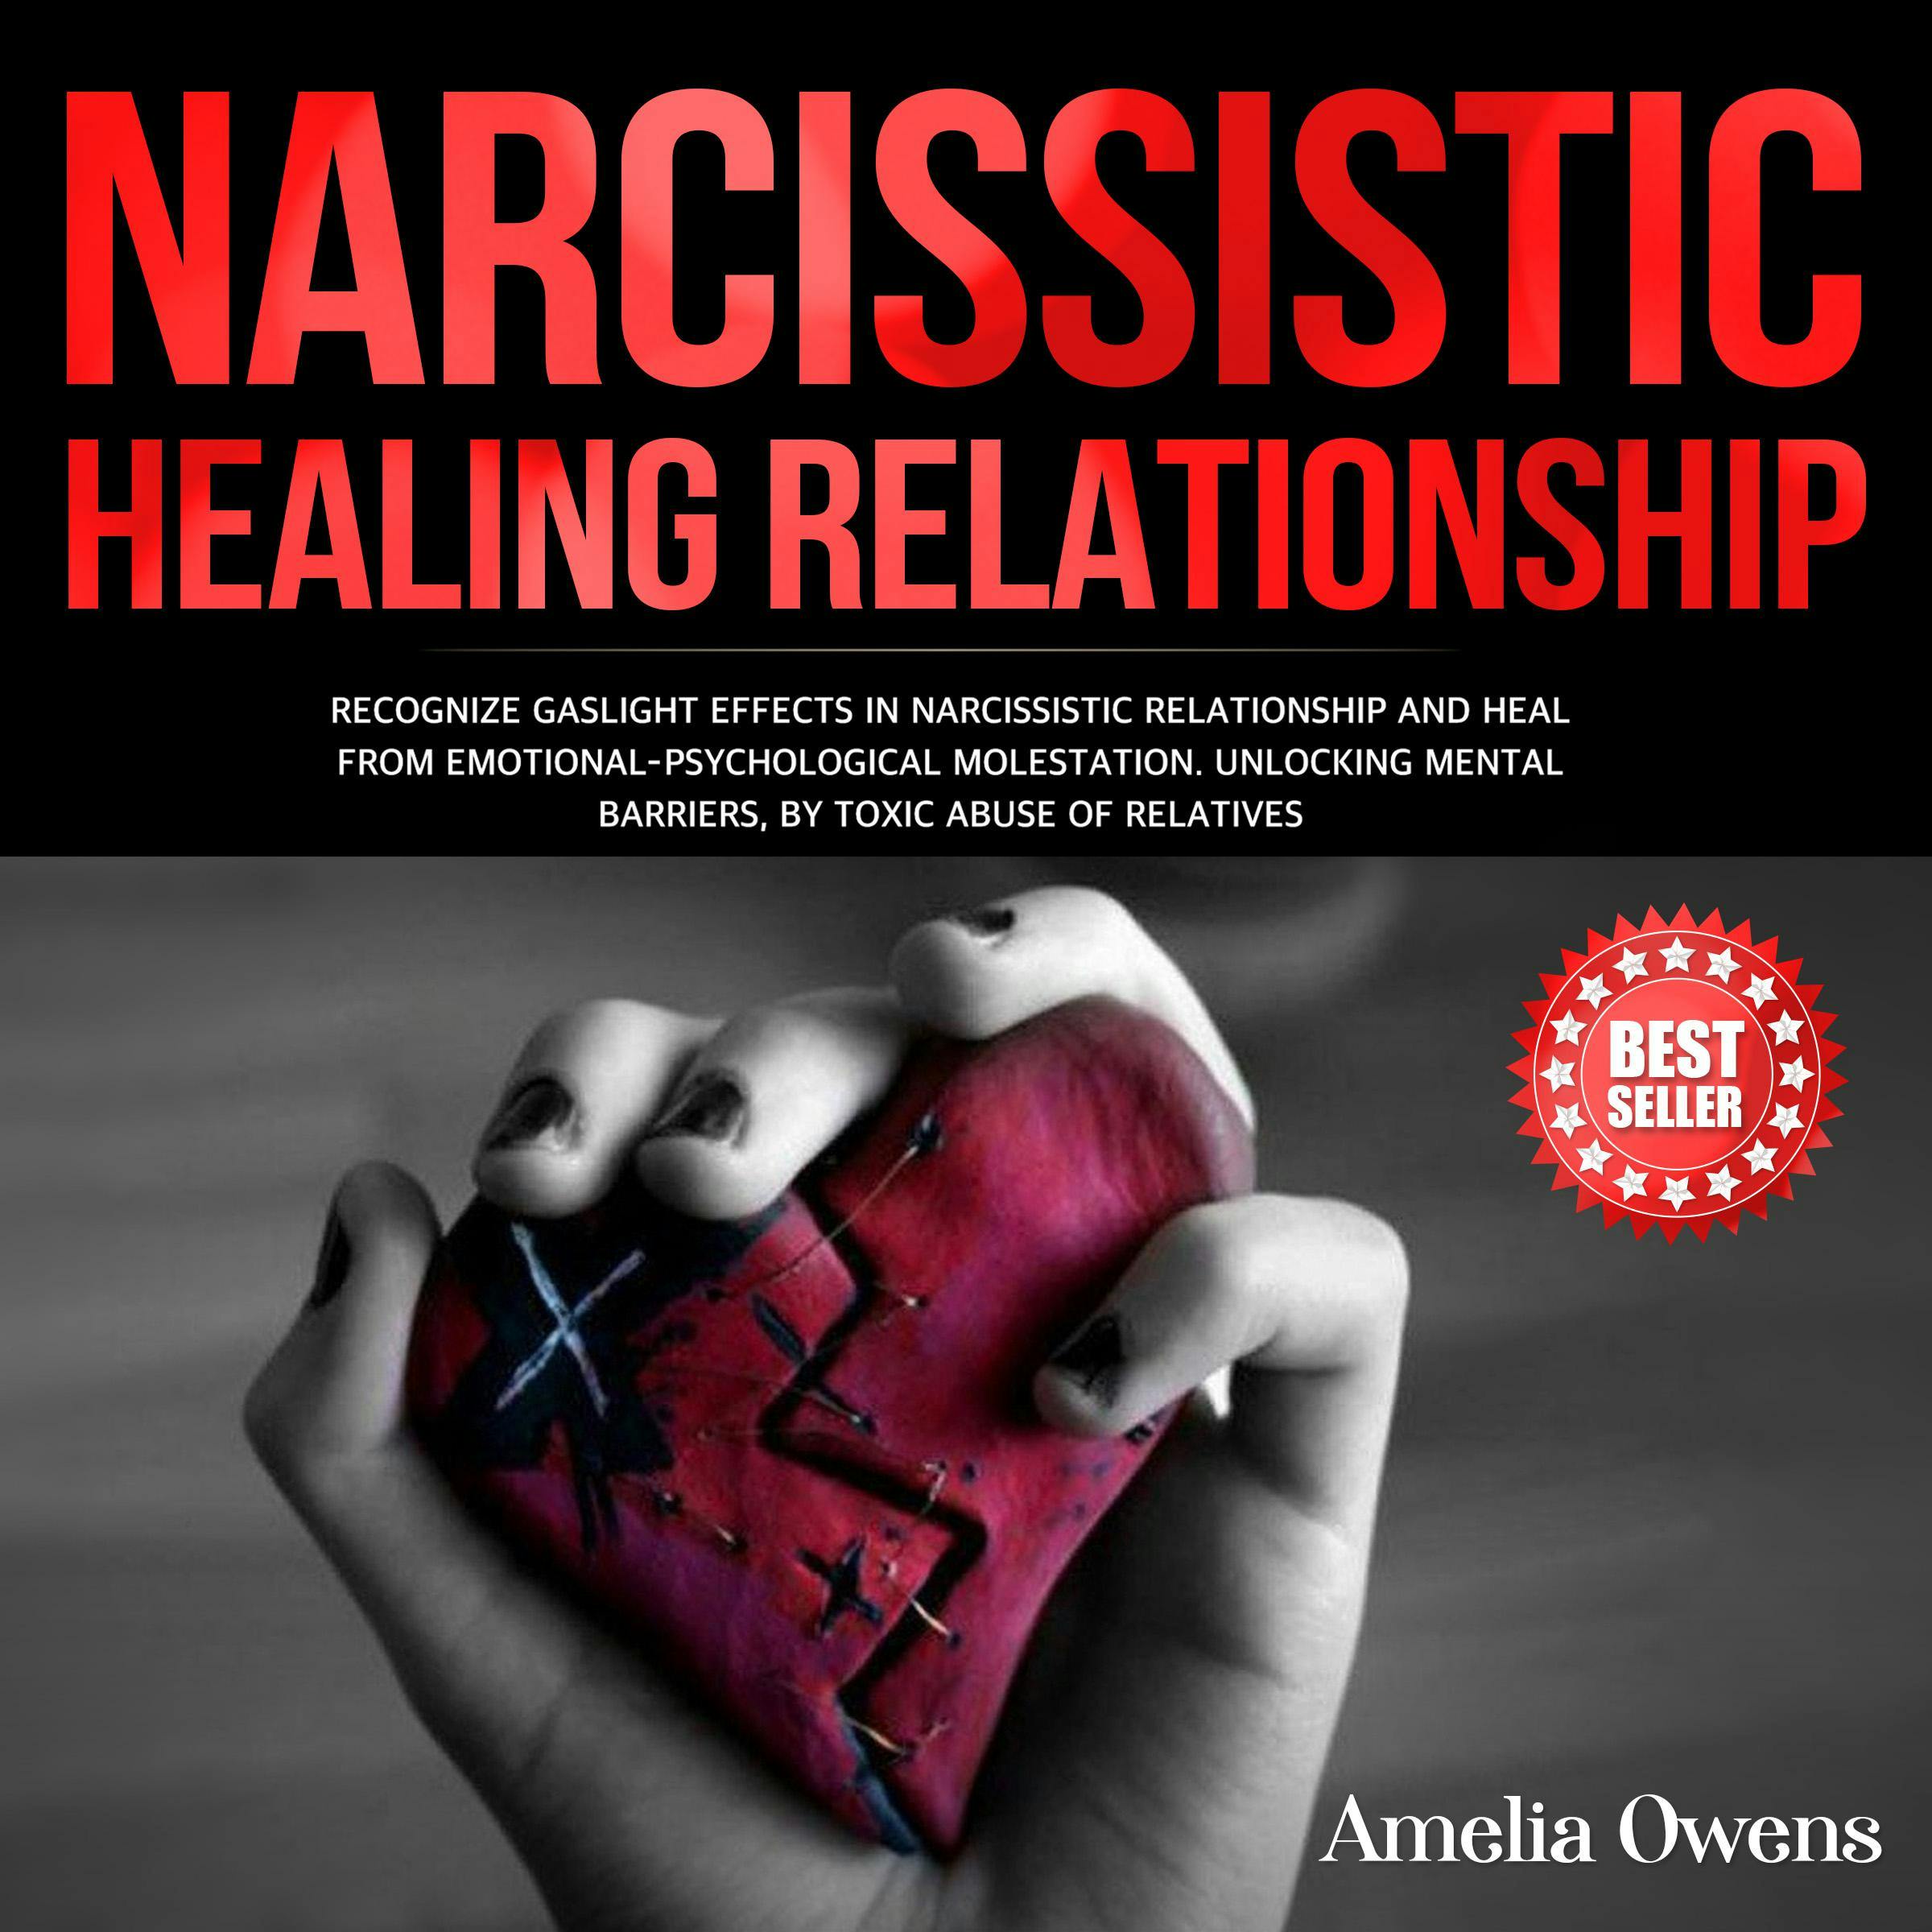 NARCISSISTIC HEALING RELATIONSHIP: Recognize gaslight effects in narcissistic relationship and heal from Emotional-Psychological molestation. Unlocking mental barriers, by toxic abuse of relatives. - Amelia Owens